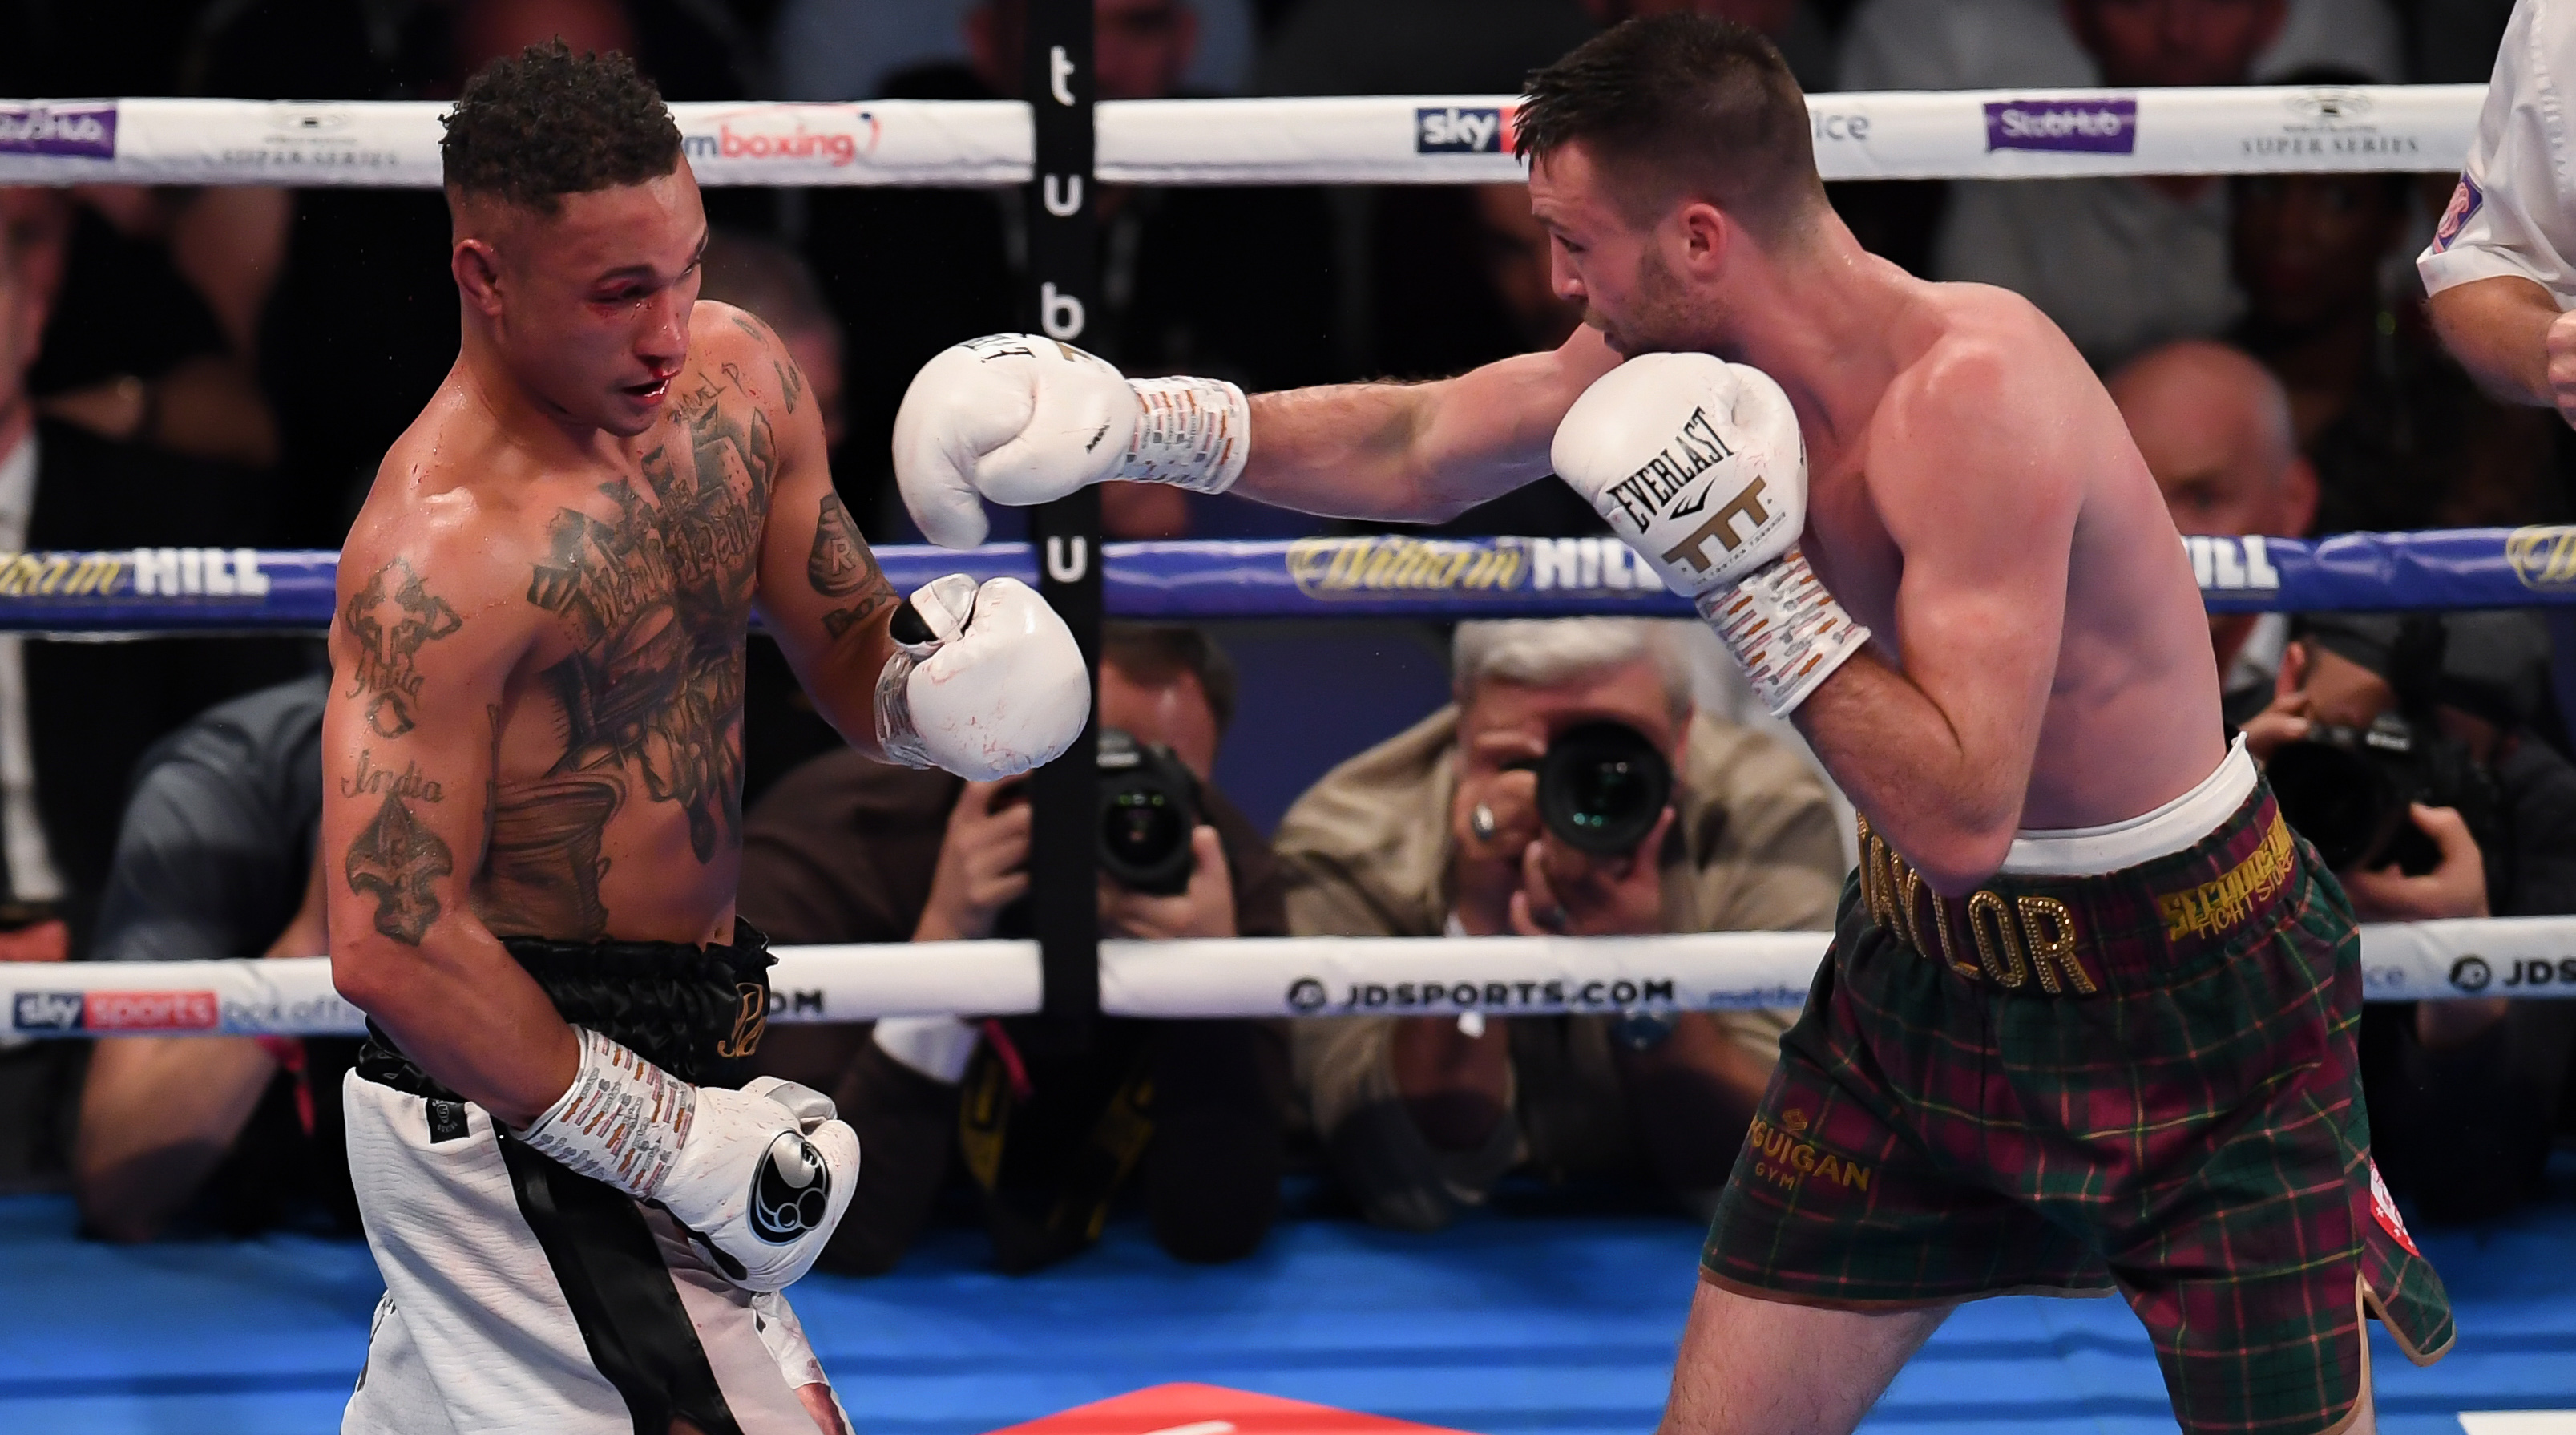 Josh Taylor throws a punch in a boxing match against Regis Prograis in 2019.